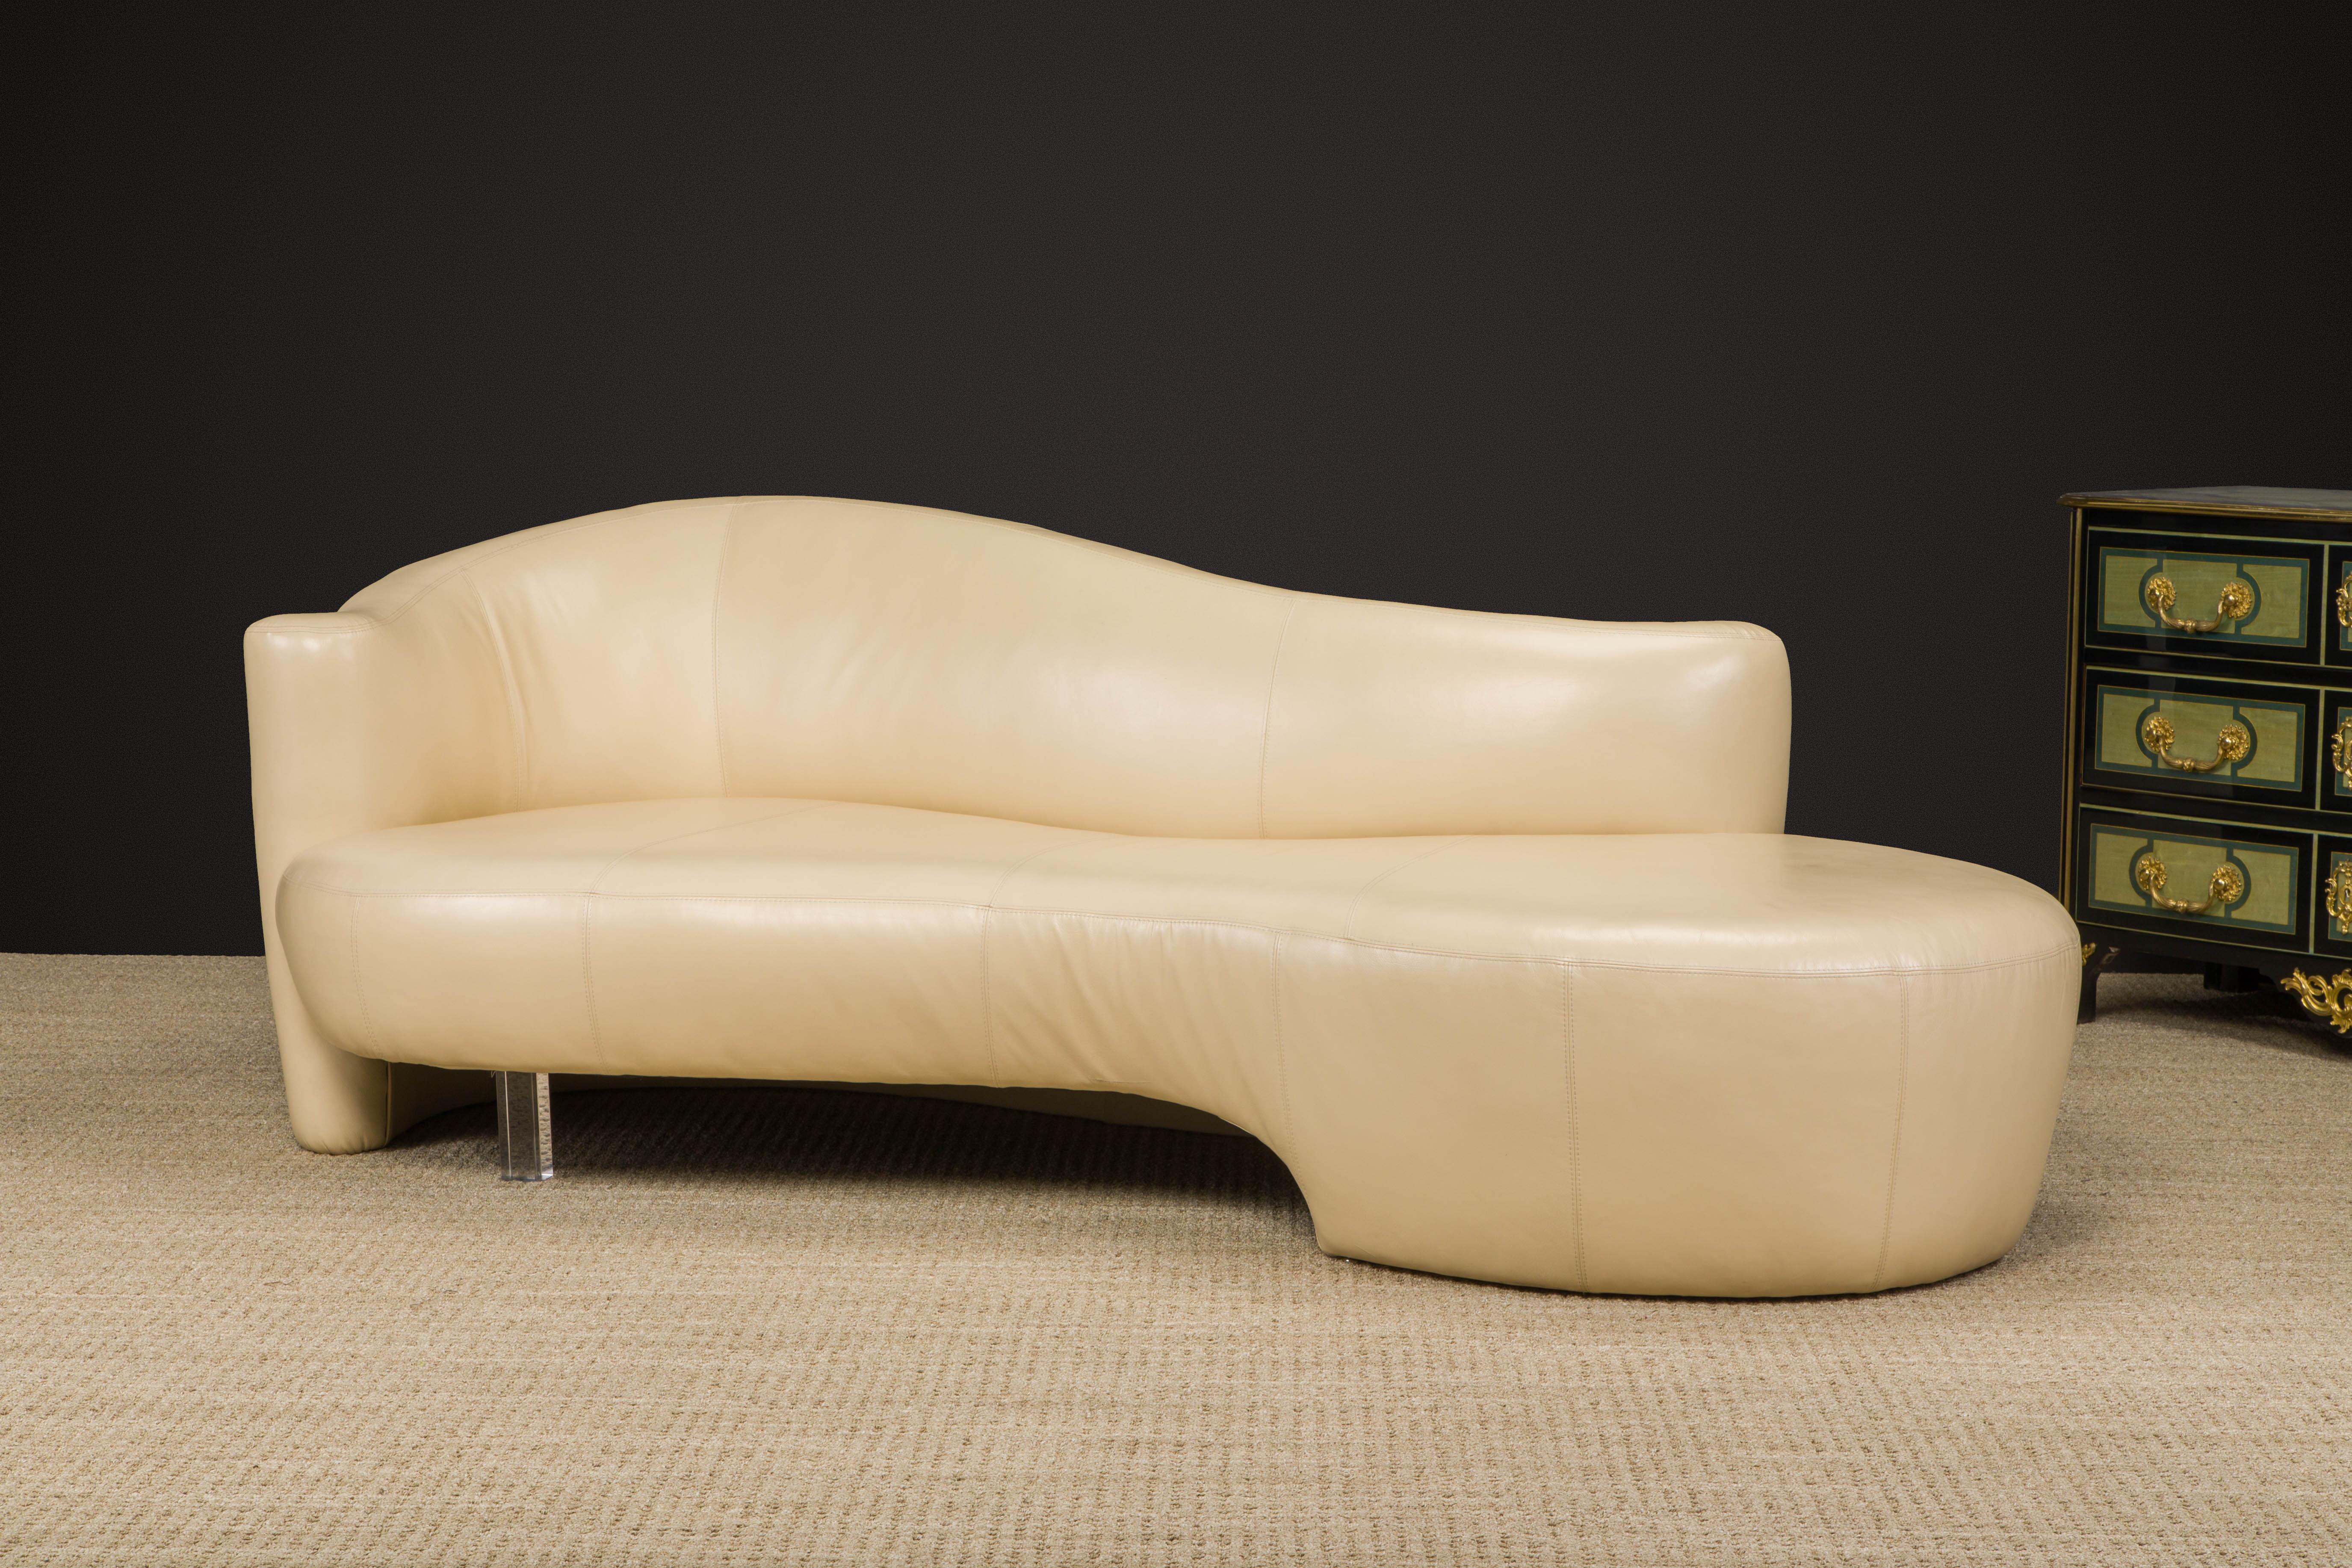 Tan Leather Cloud Style Sofa with Lucite Leg by Weiman, c 1980s, Signed For Sale 8